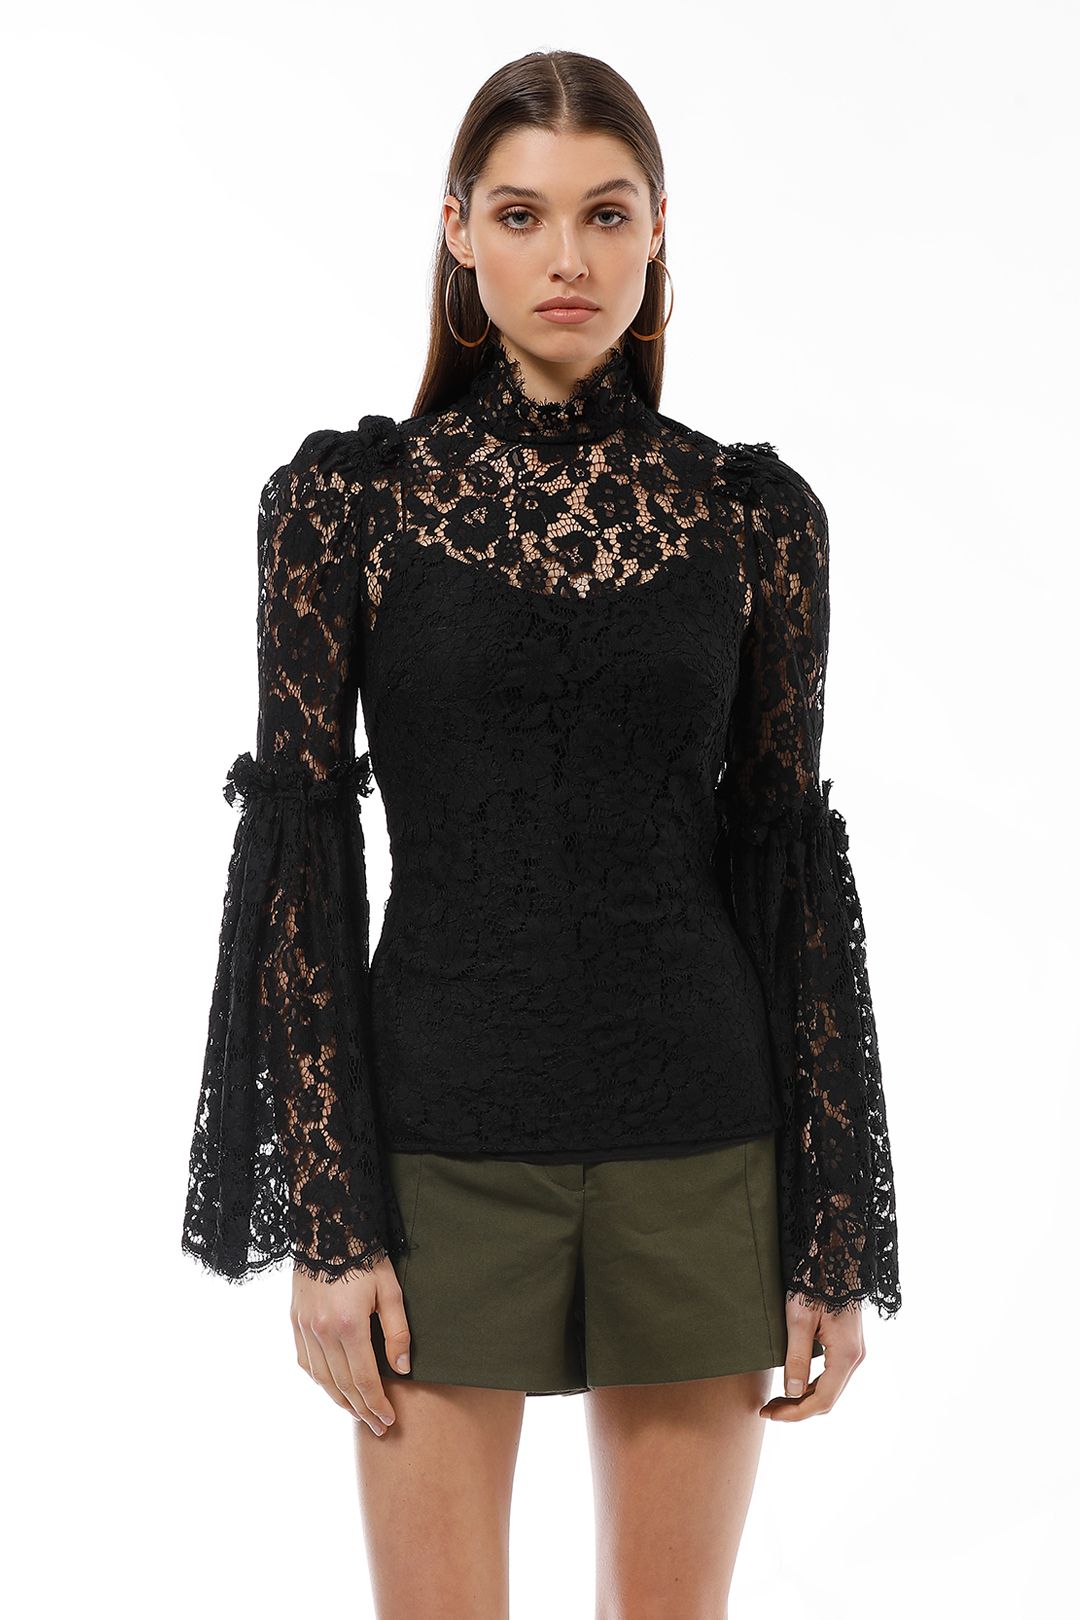 Camilla and Marc - Clemence Top - Black - Front Crop